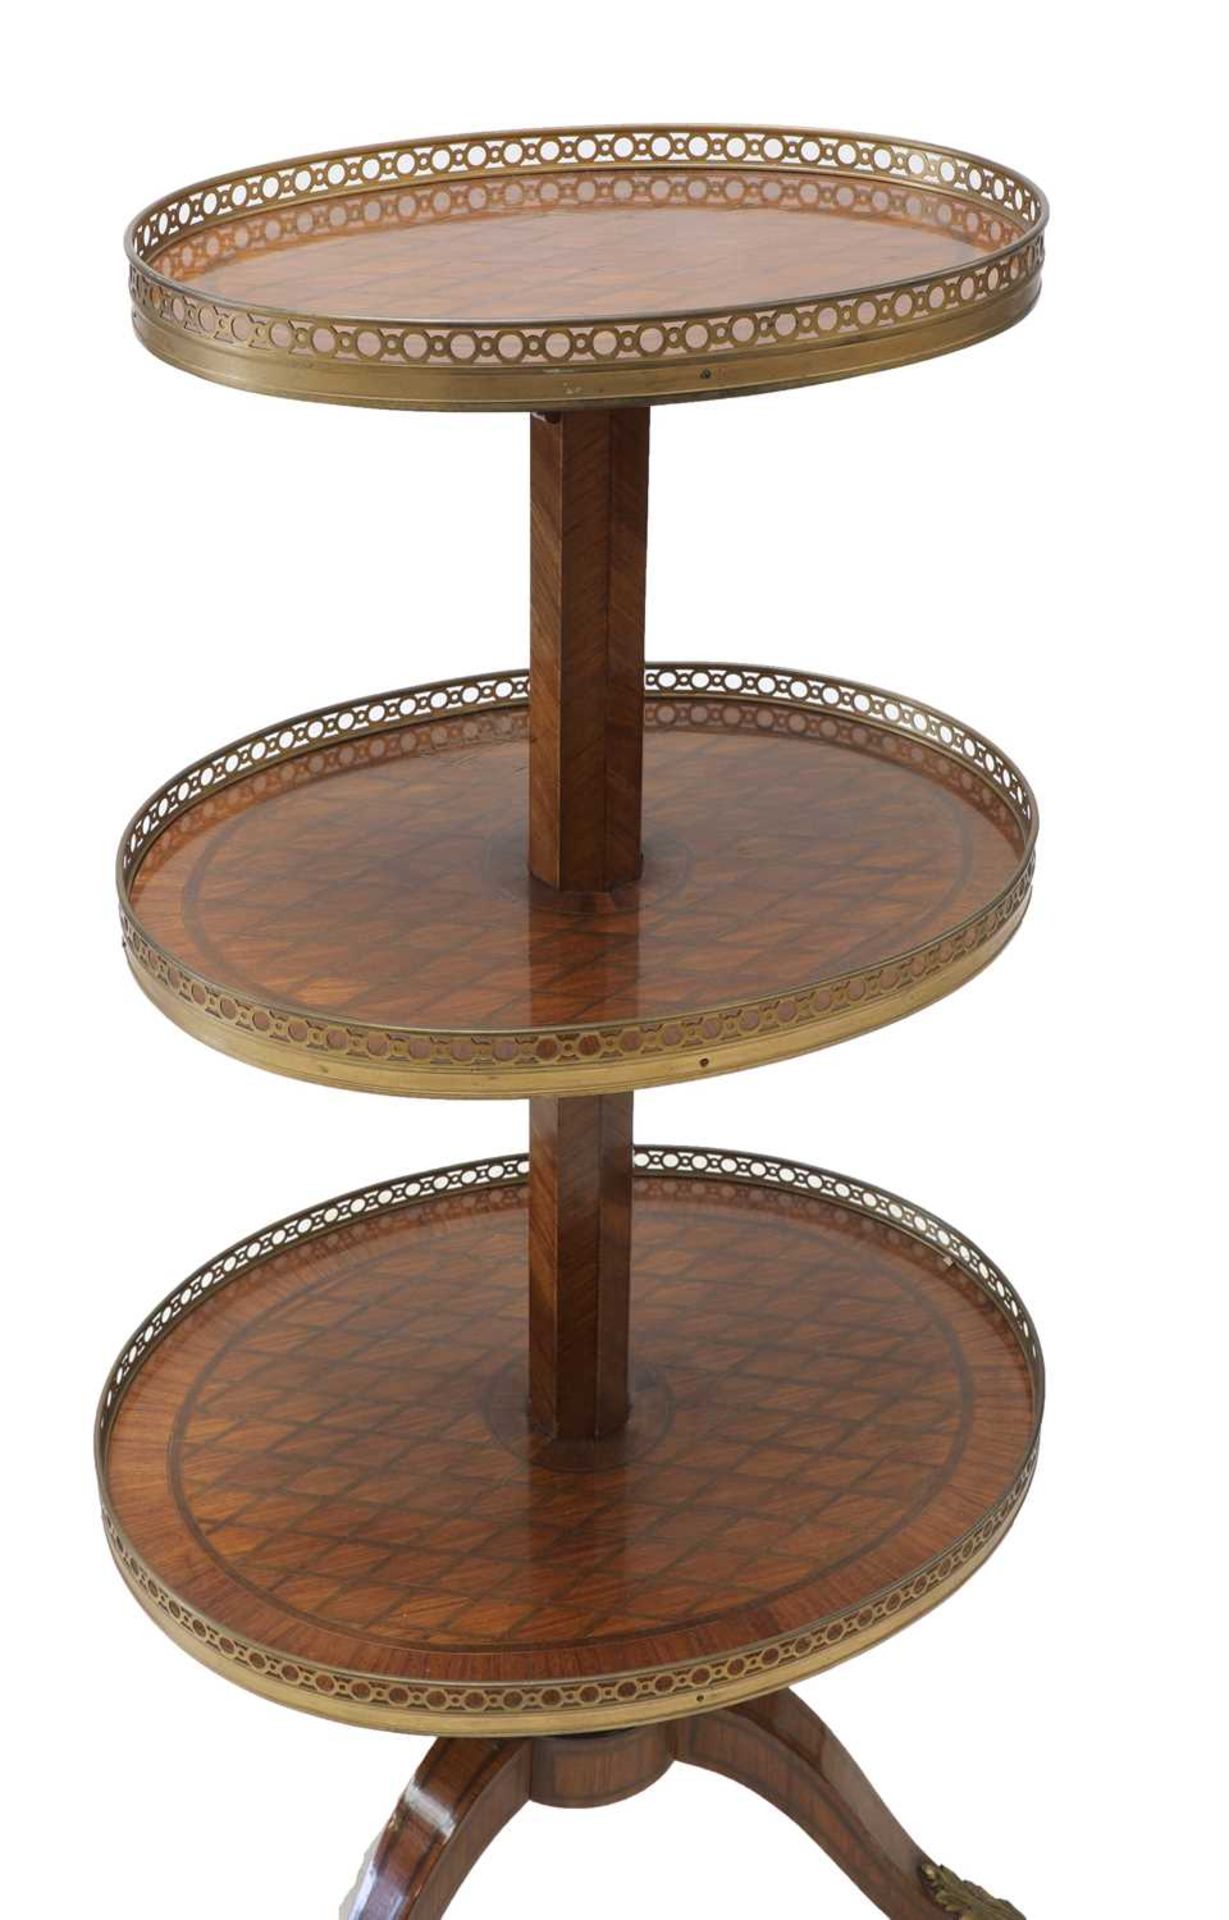 A Louis XVI-style kingwood and parquetry étagère, - Image 3 of 3